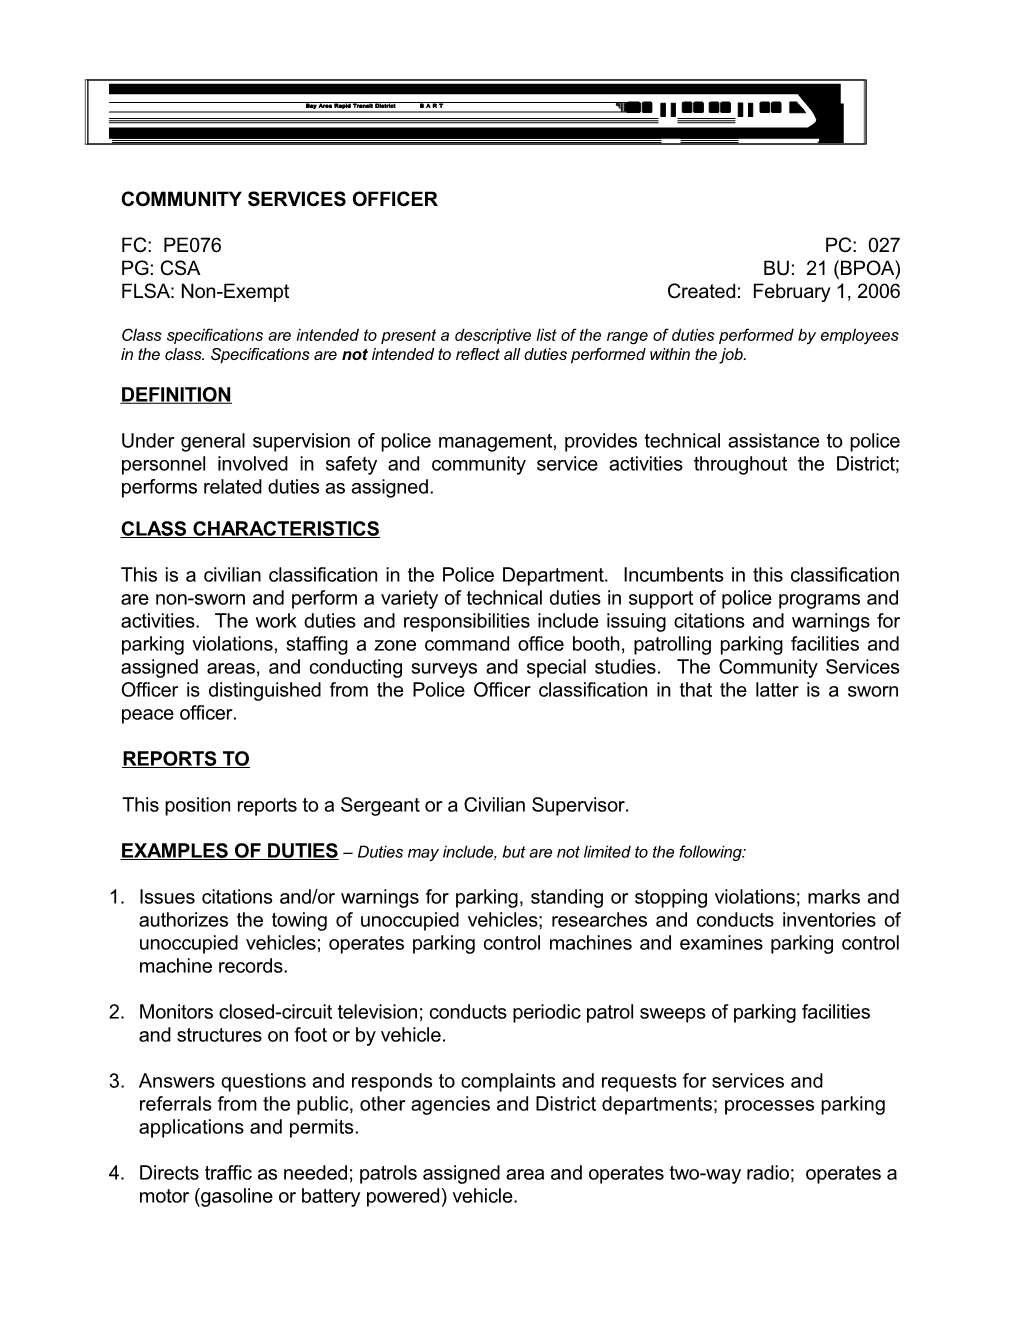 Community Services Officer